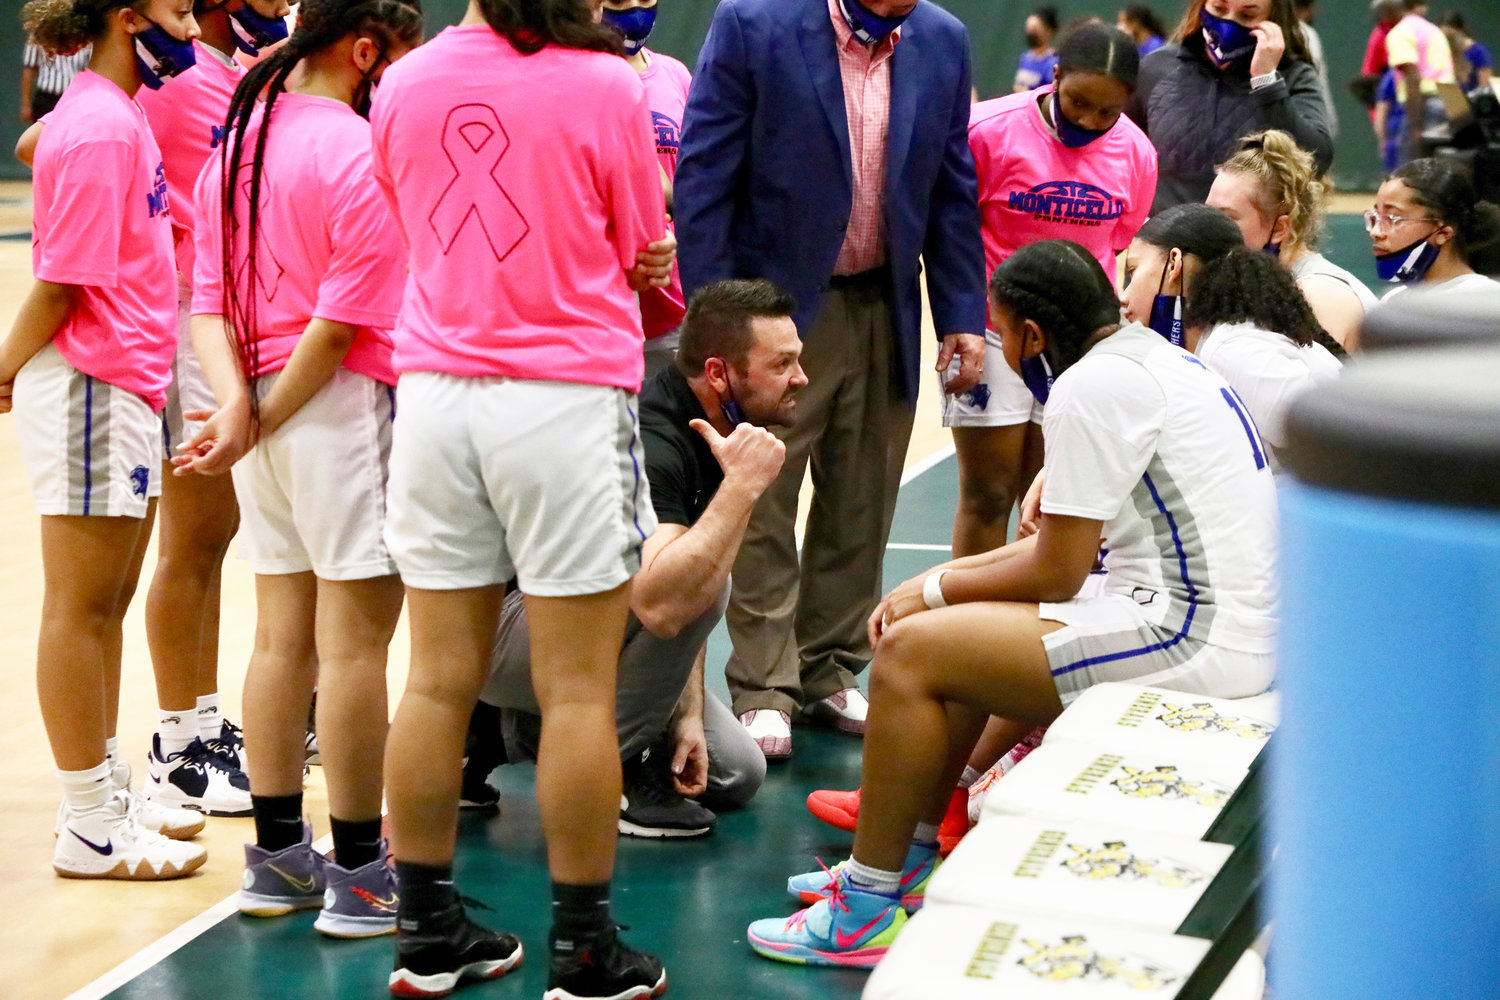 Monticello girls’ coach Ryan Jasper emotionally manifests his displeasure during a timeout as his talented and unselfish team squanders an early lead by seemingly forgetting much of what they have learned to date.